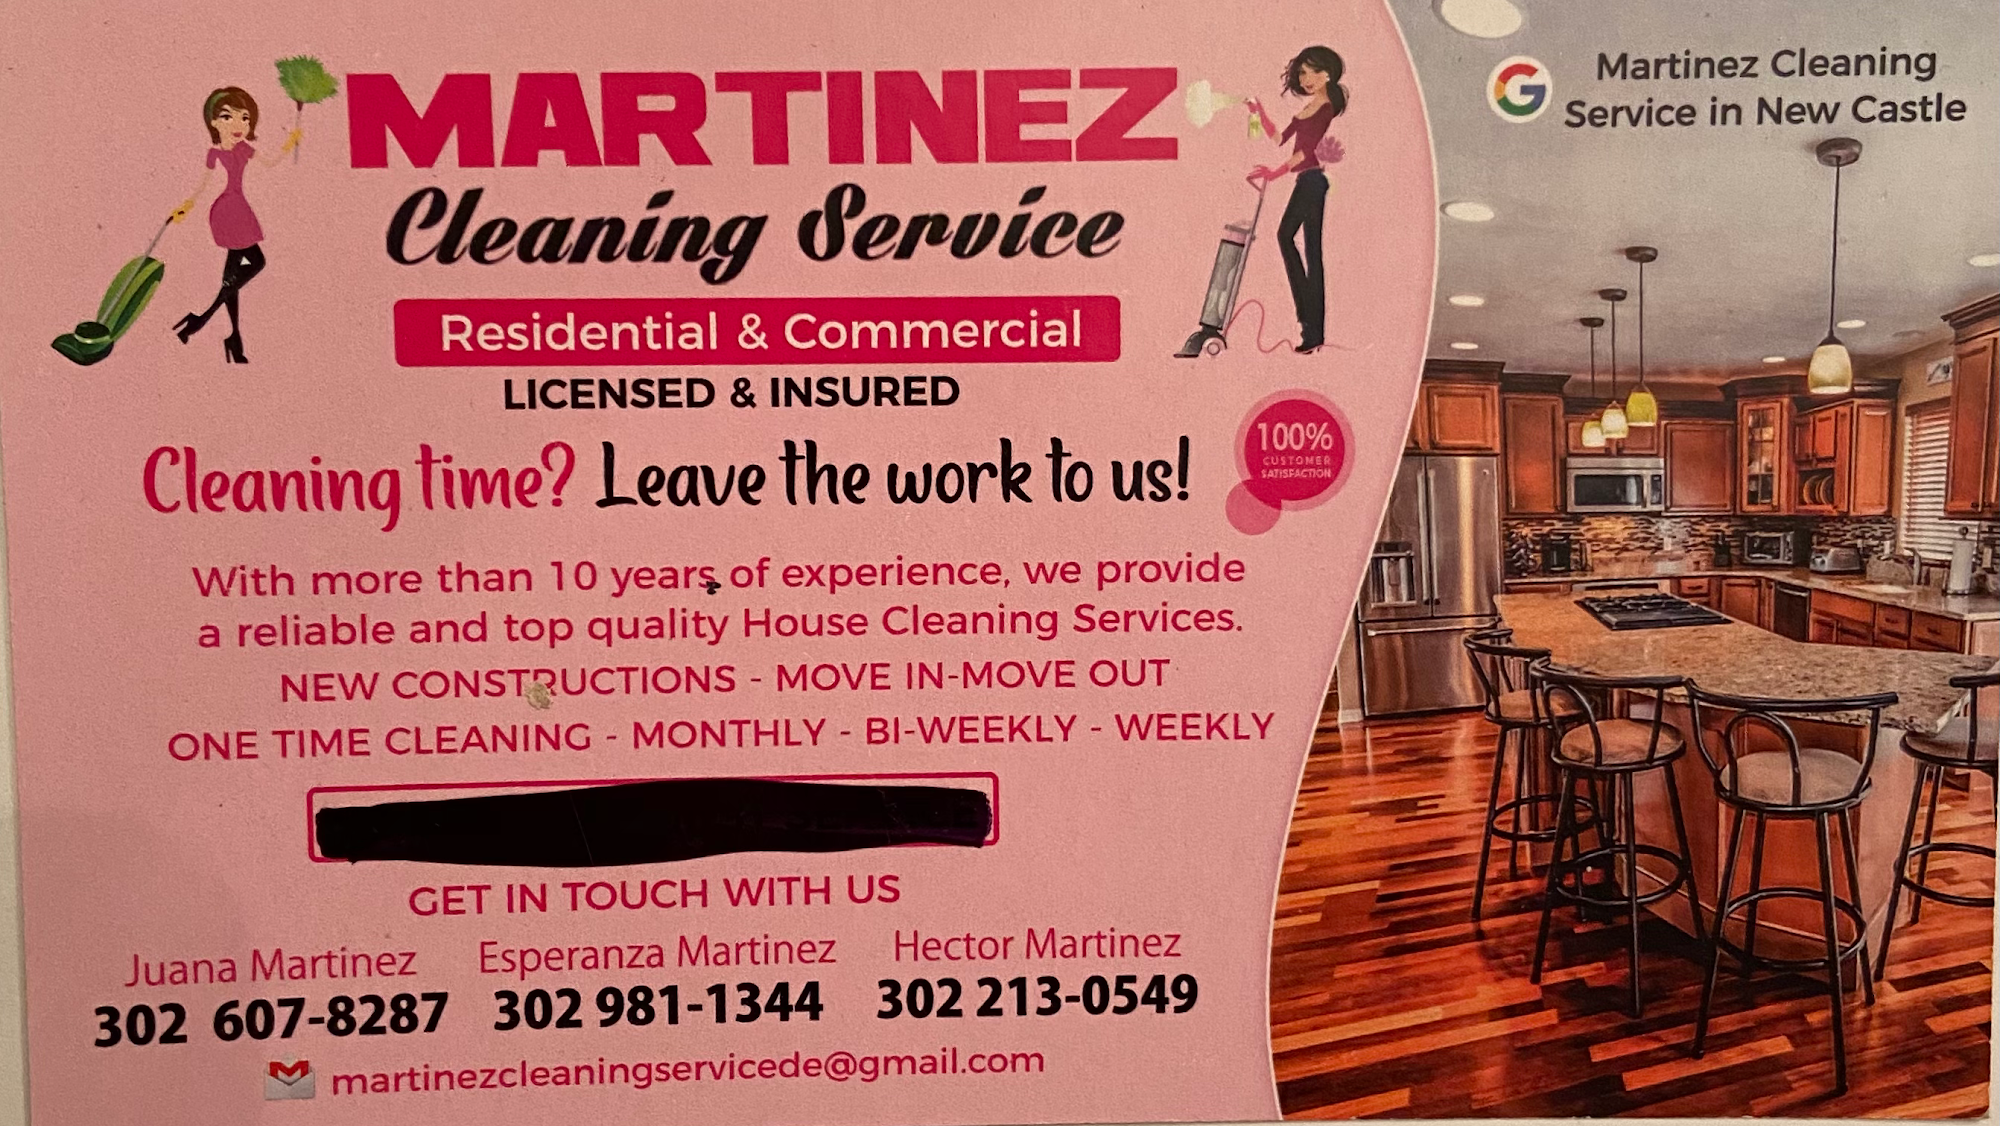 Martinez Cleaning Service